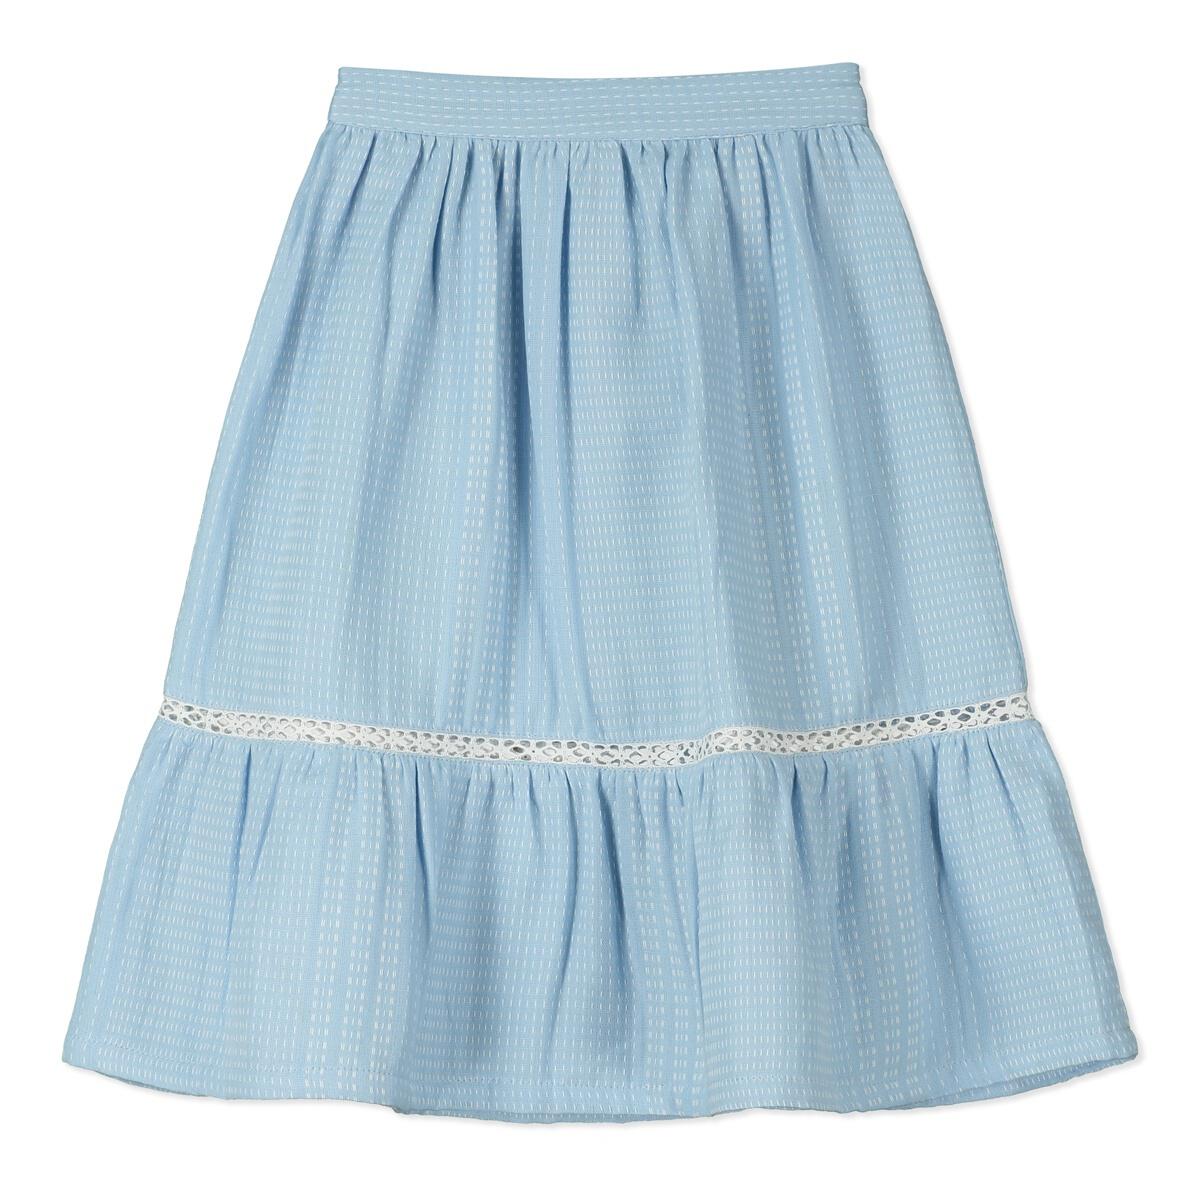 Santorini Stitched Blue & White Cotton Skirt - Twinkle Twinkle Little One